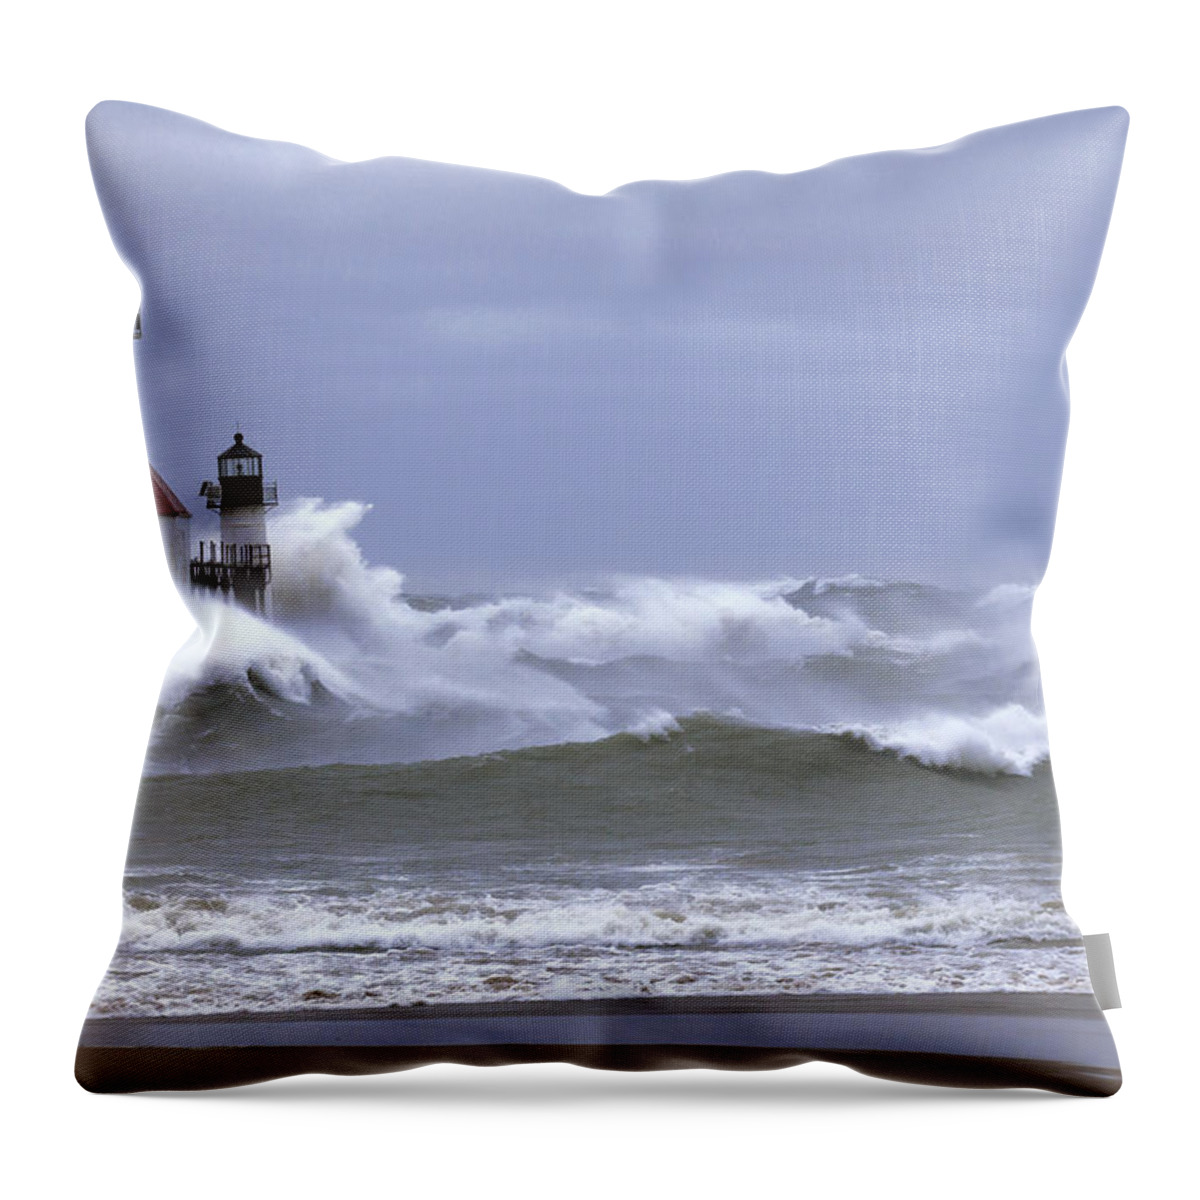 Lake Michigan Throw Pillow featuring the photograph Angry Lake Michigan by John Crothers